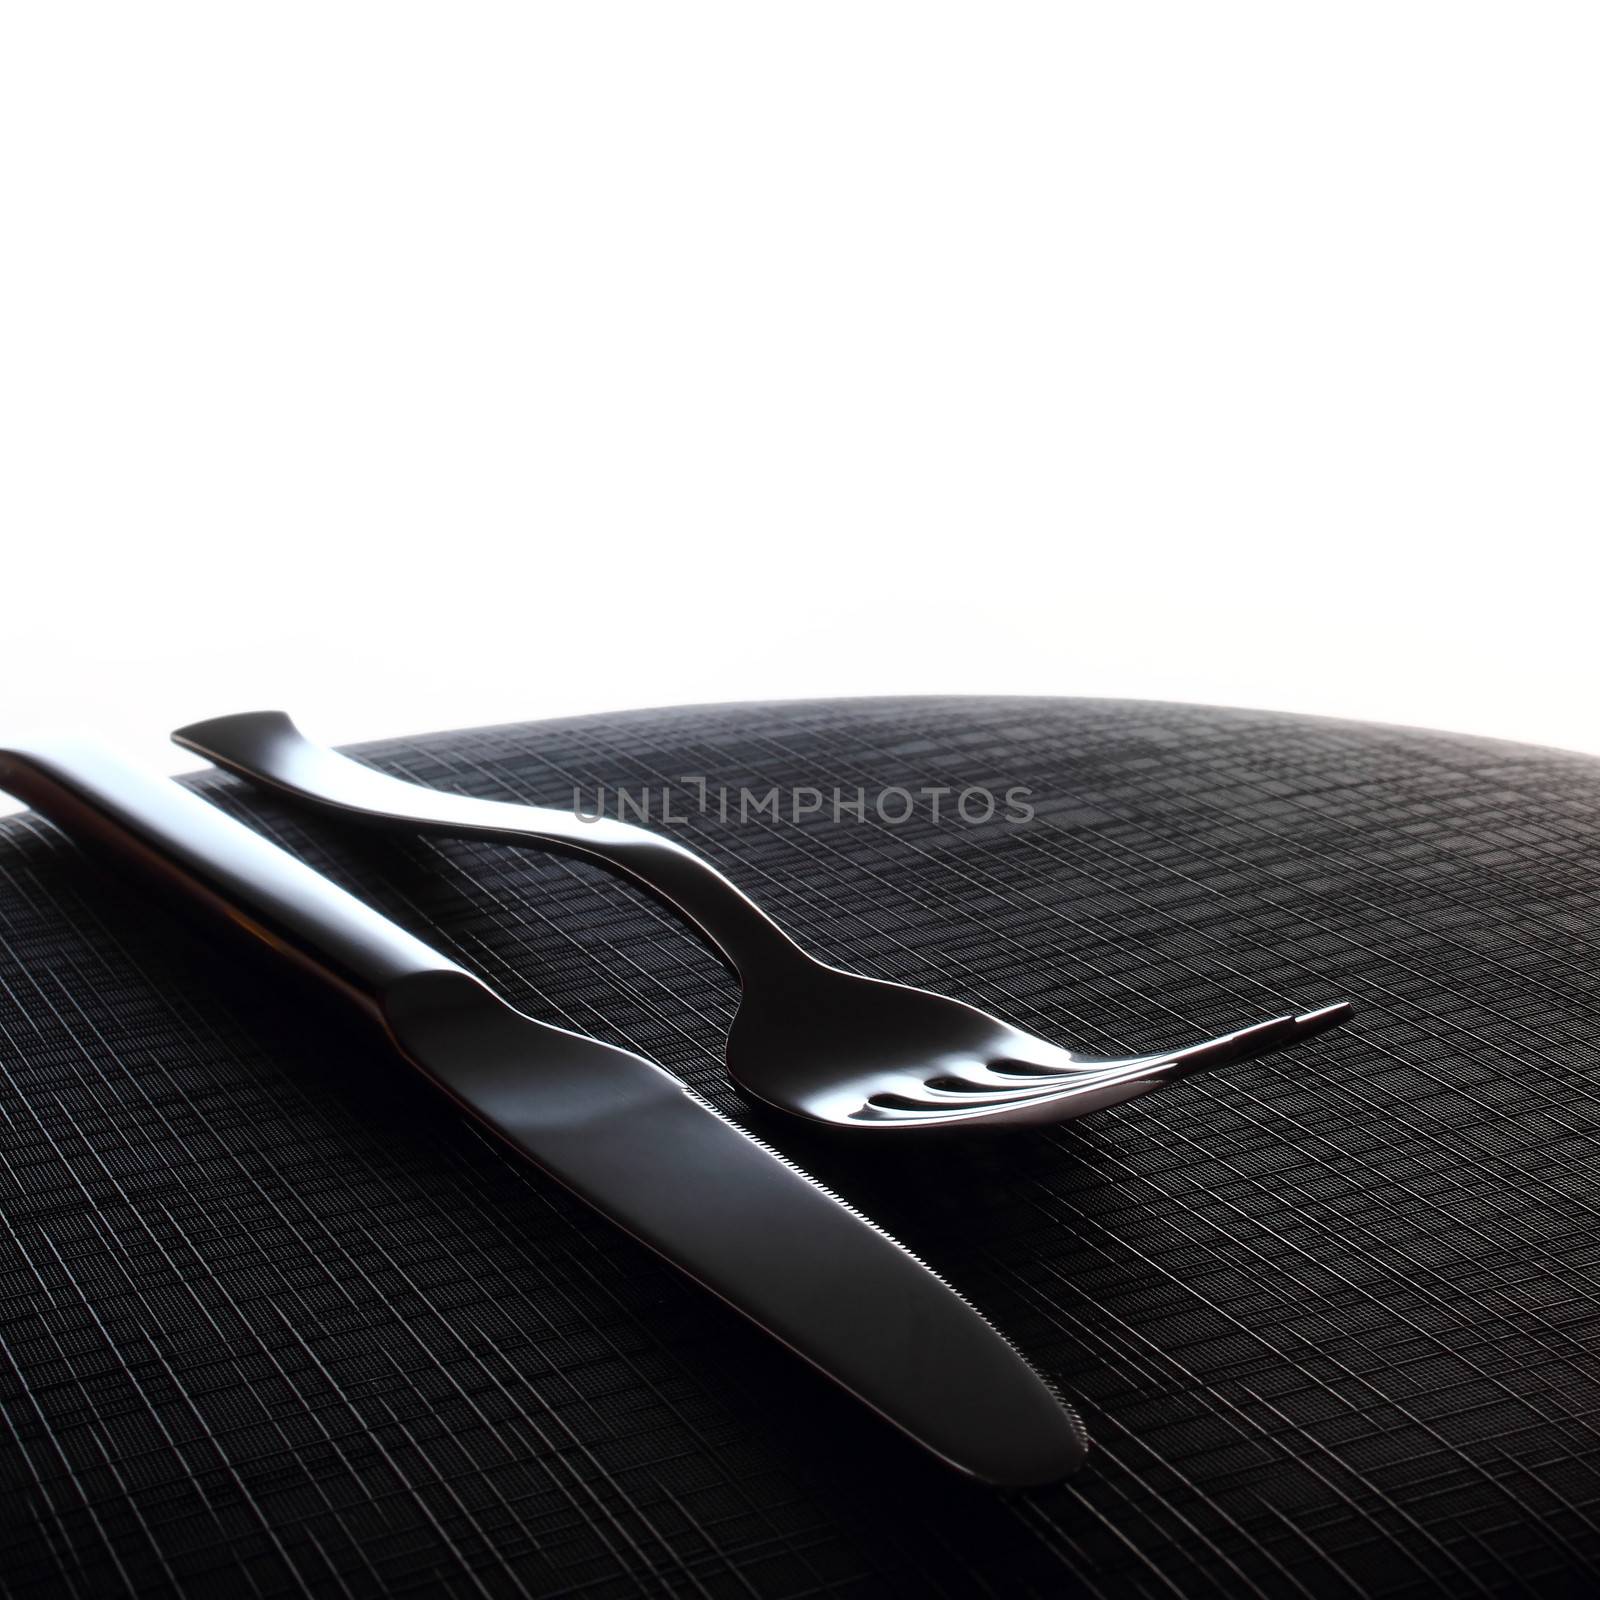 Diner cutlery by dynamicfoto